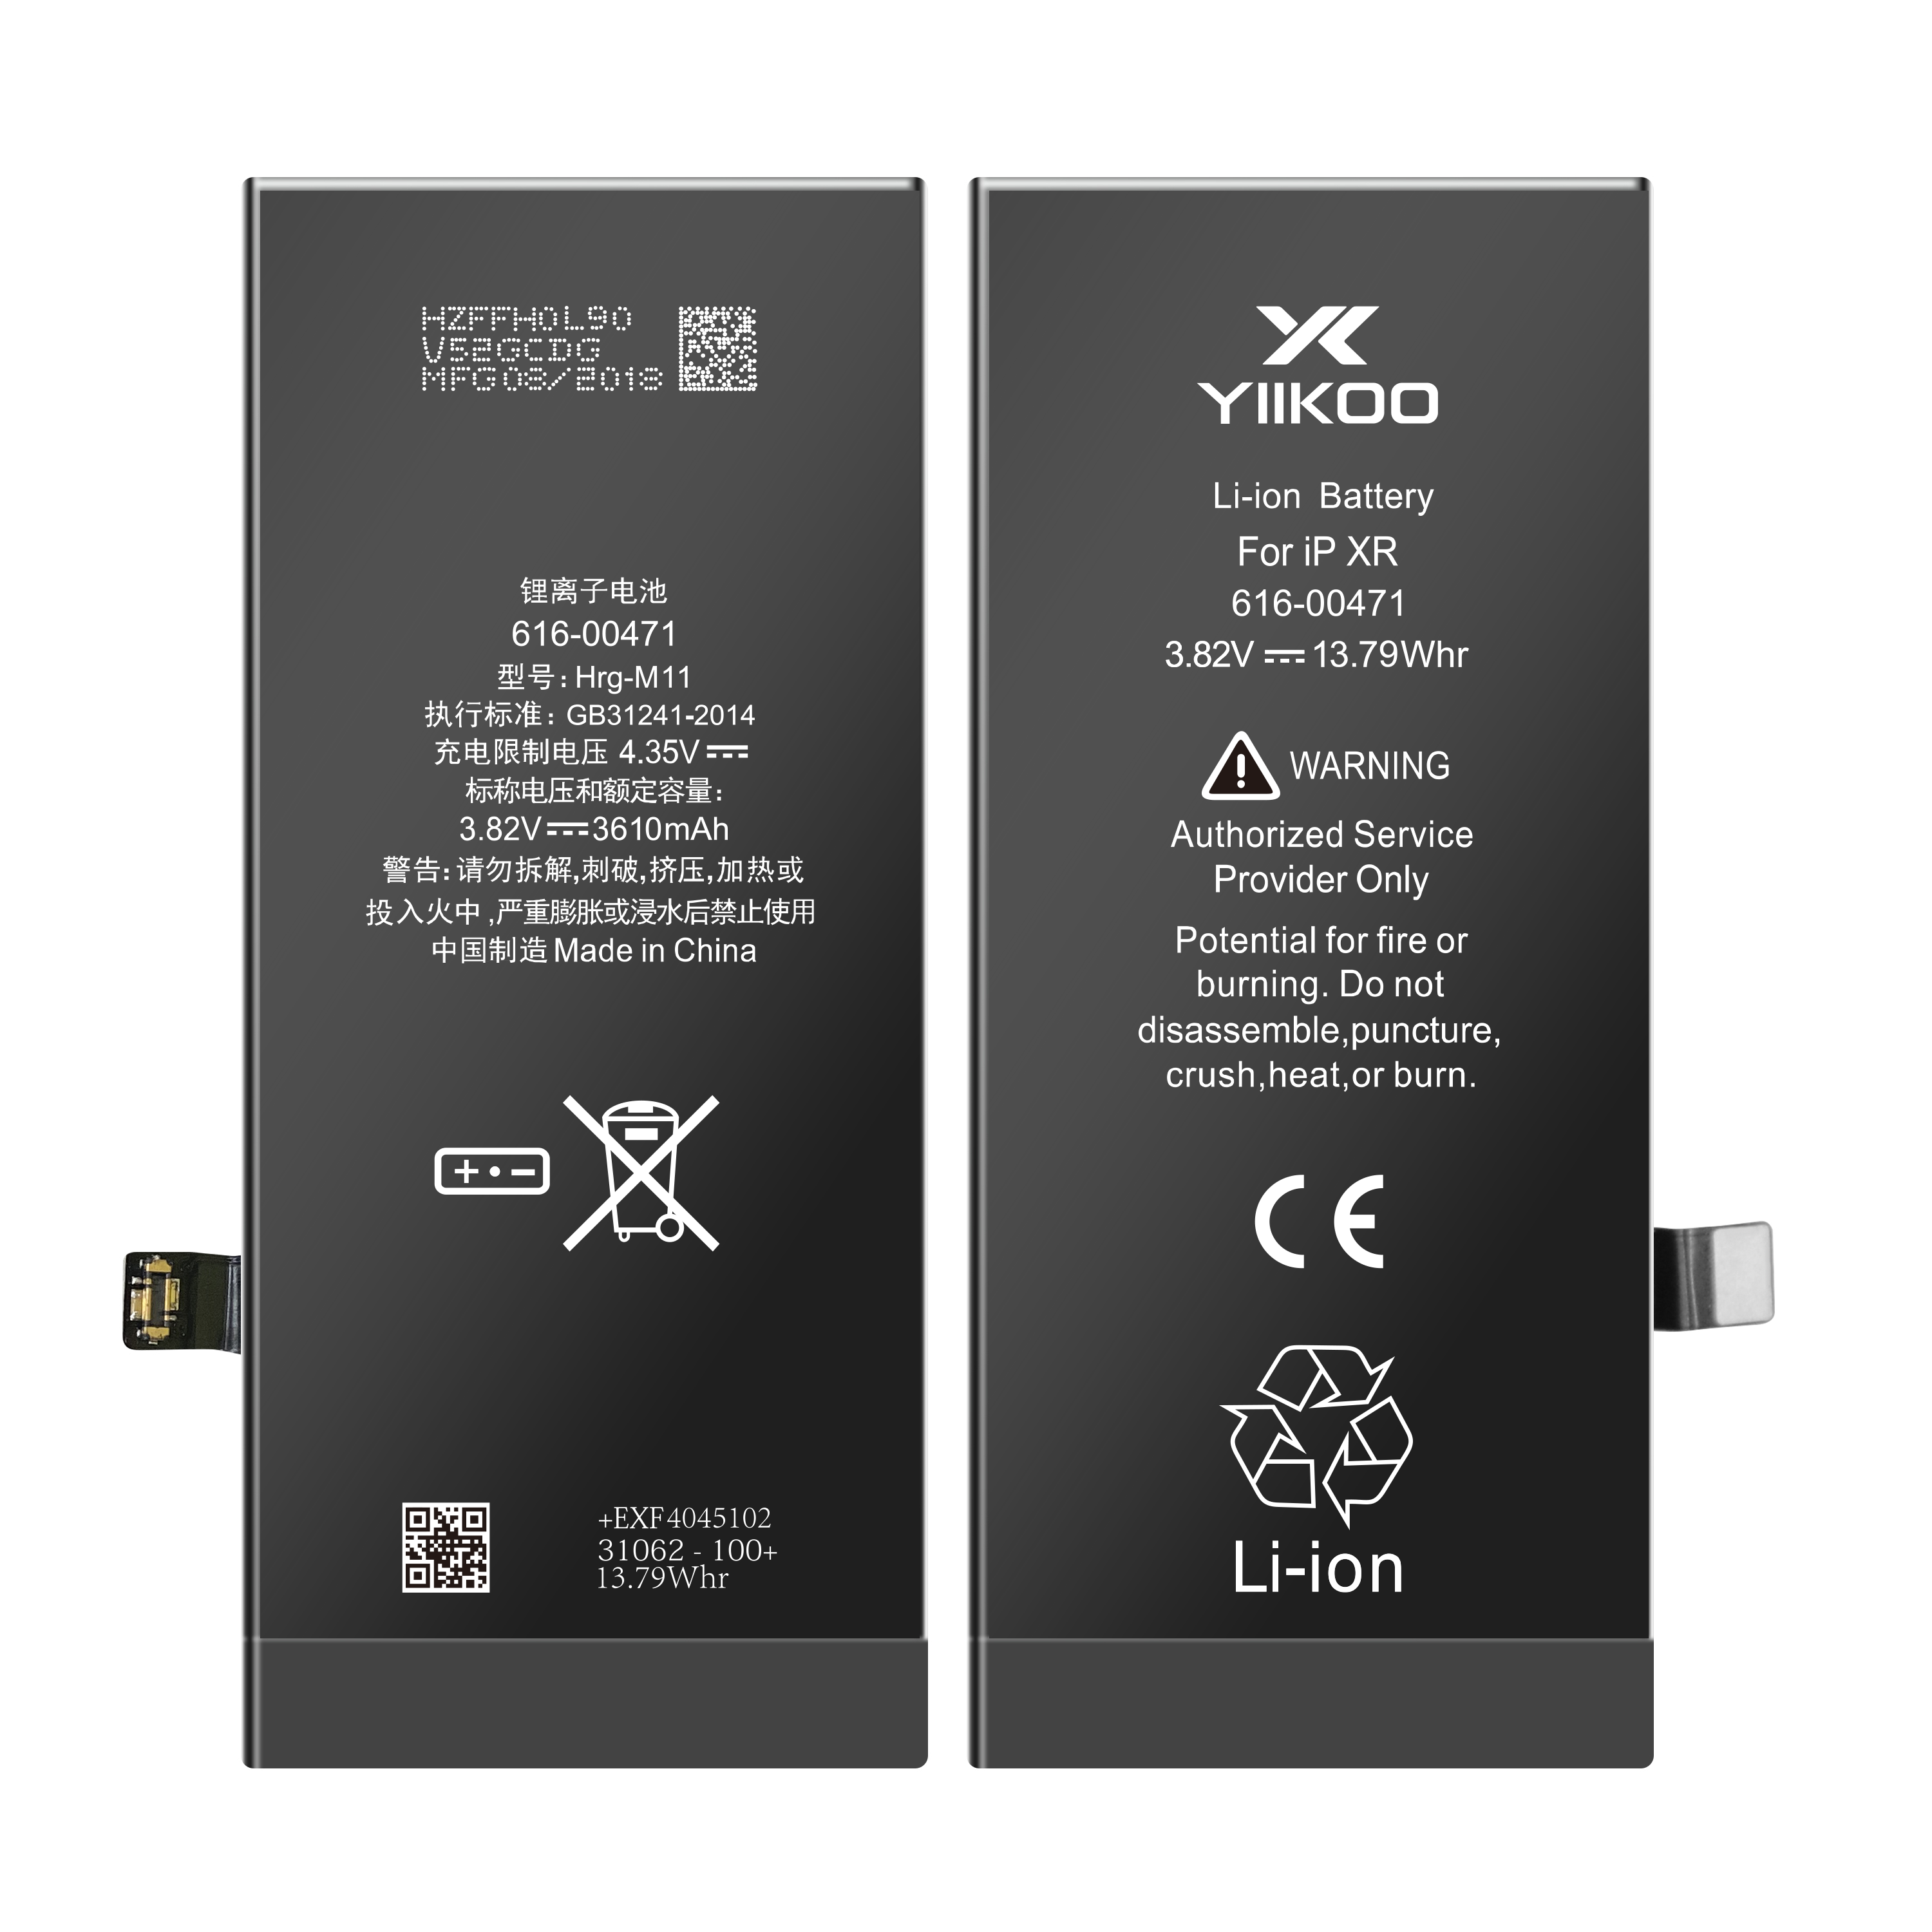 New Pro smartphone battery offers longer lifespan and improved performance